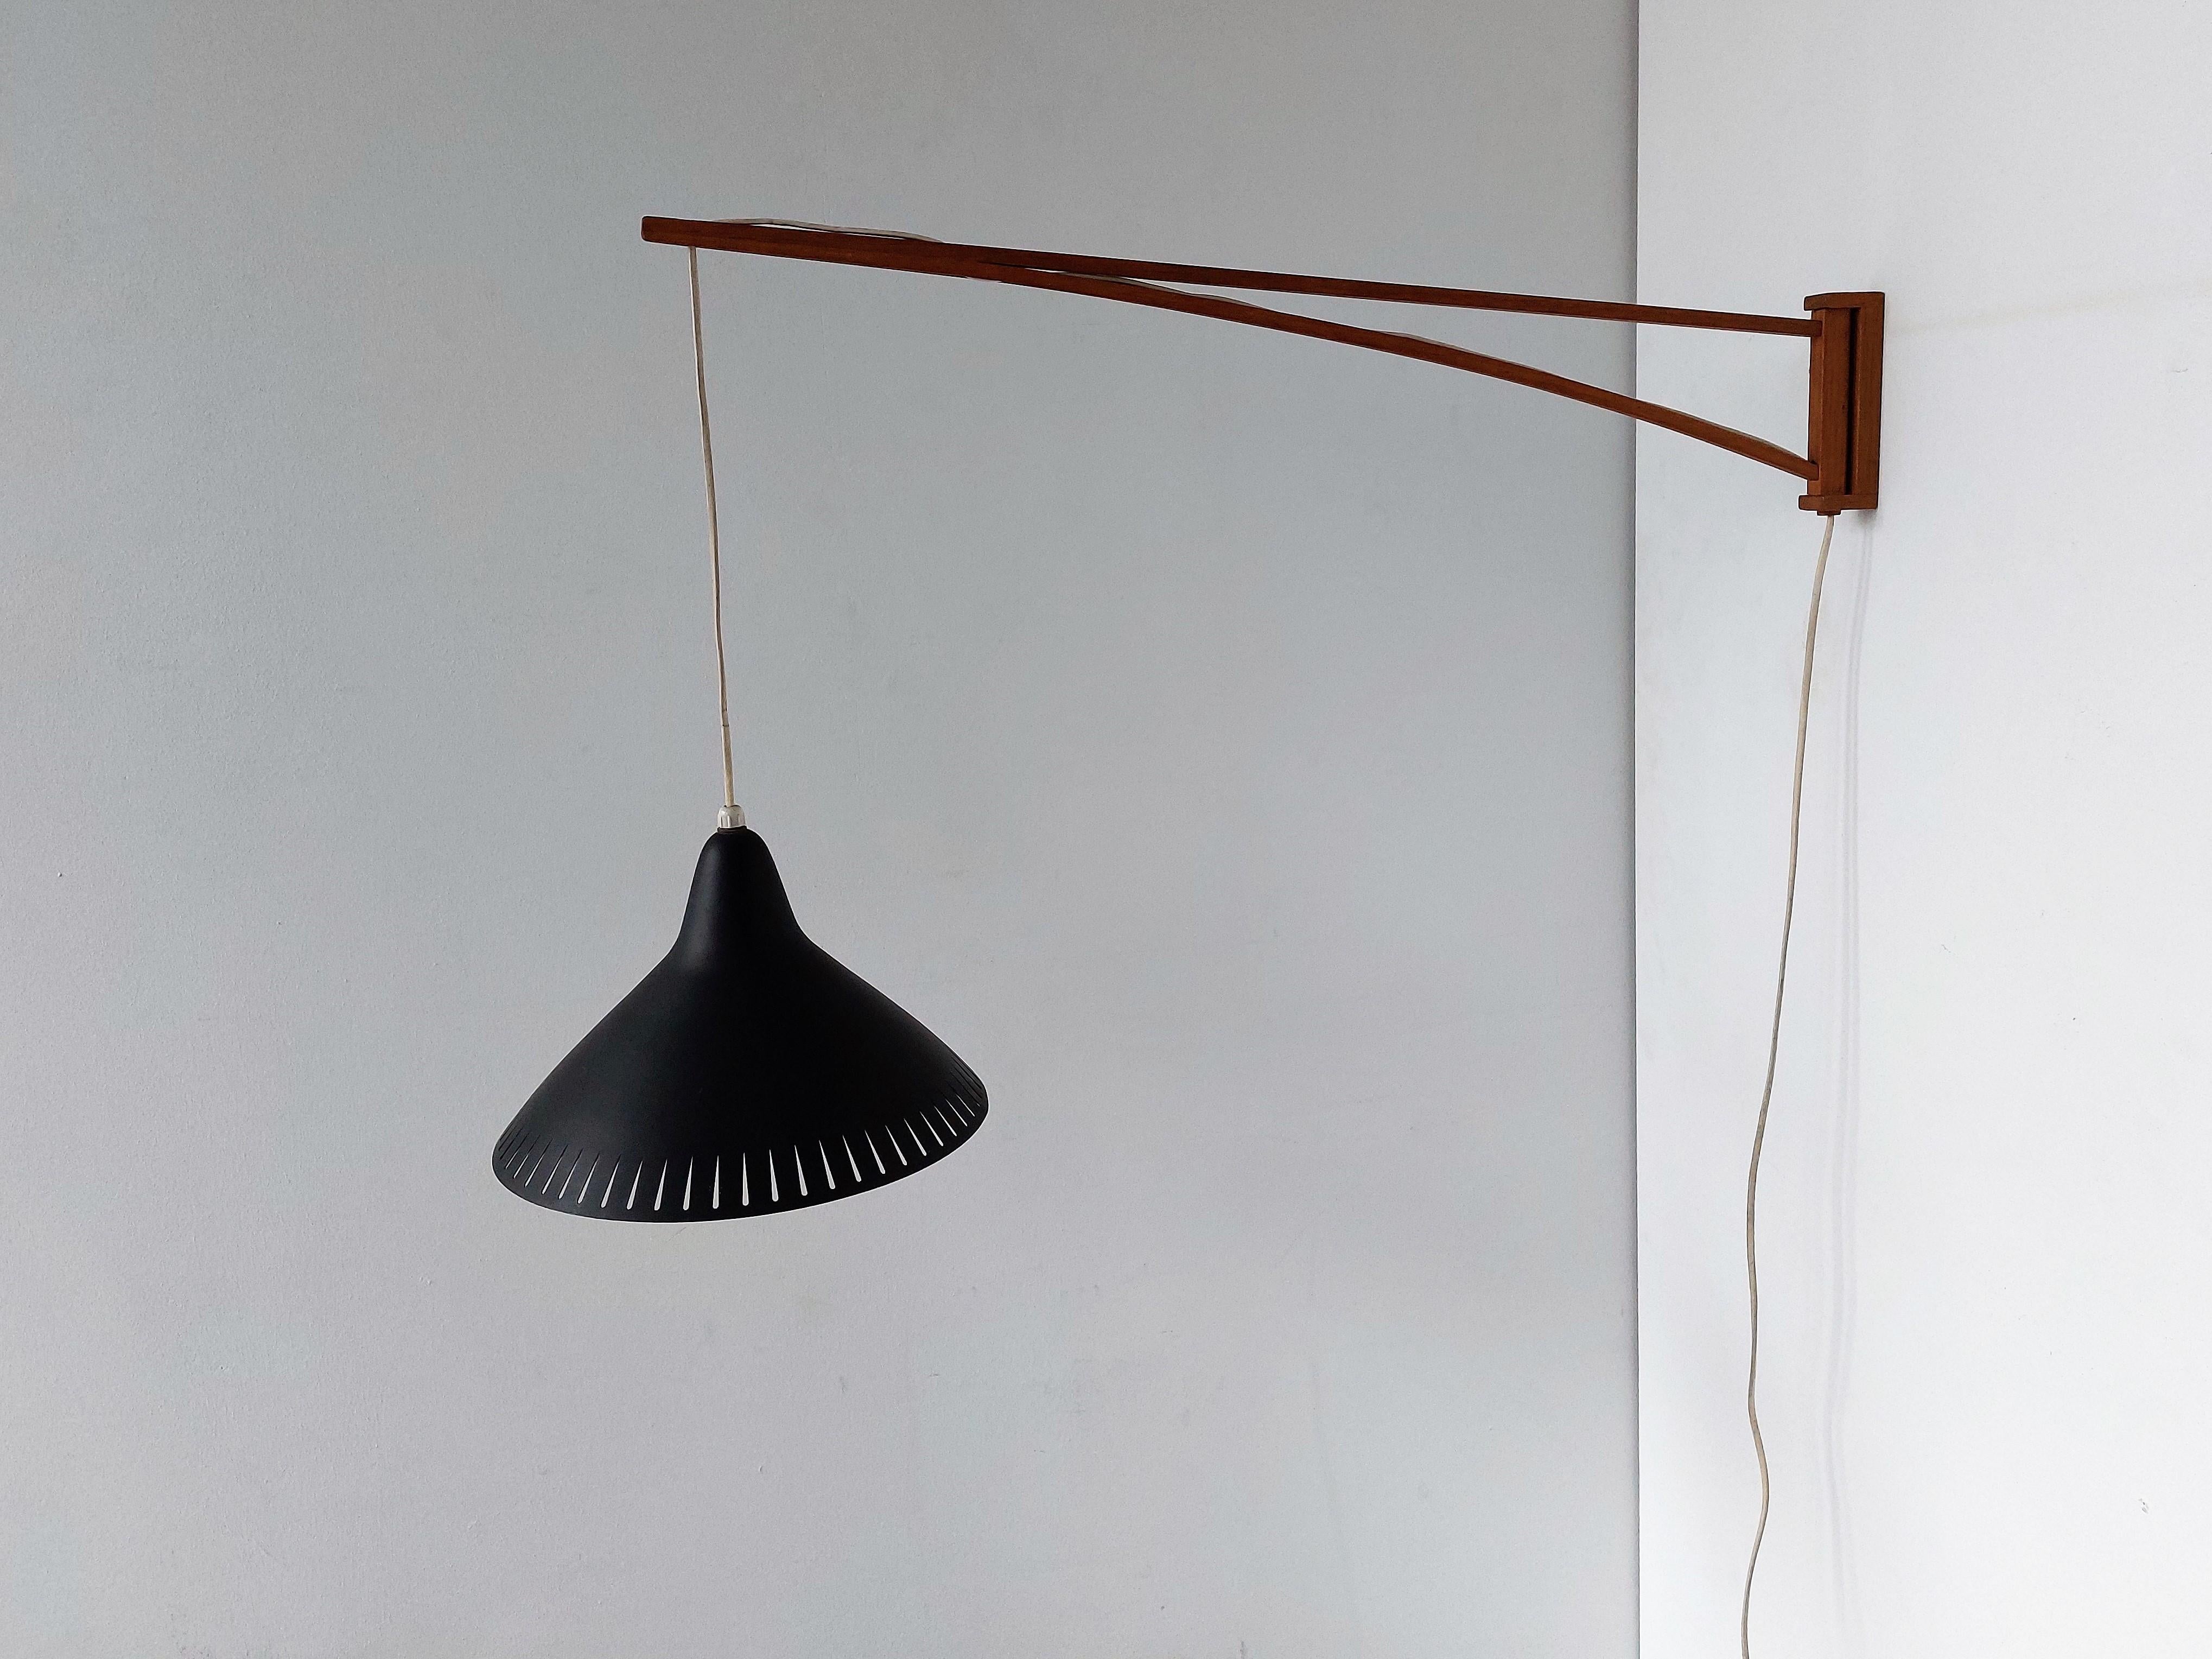 A beautiful wall lamp from the 1950's. It has an elegant wooden swing arm that holds a nicely shaped black metal shade with perforated details. This design is most likely of or inspired by the designs of the Finnish designer Lisa Johansson-Pape (for